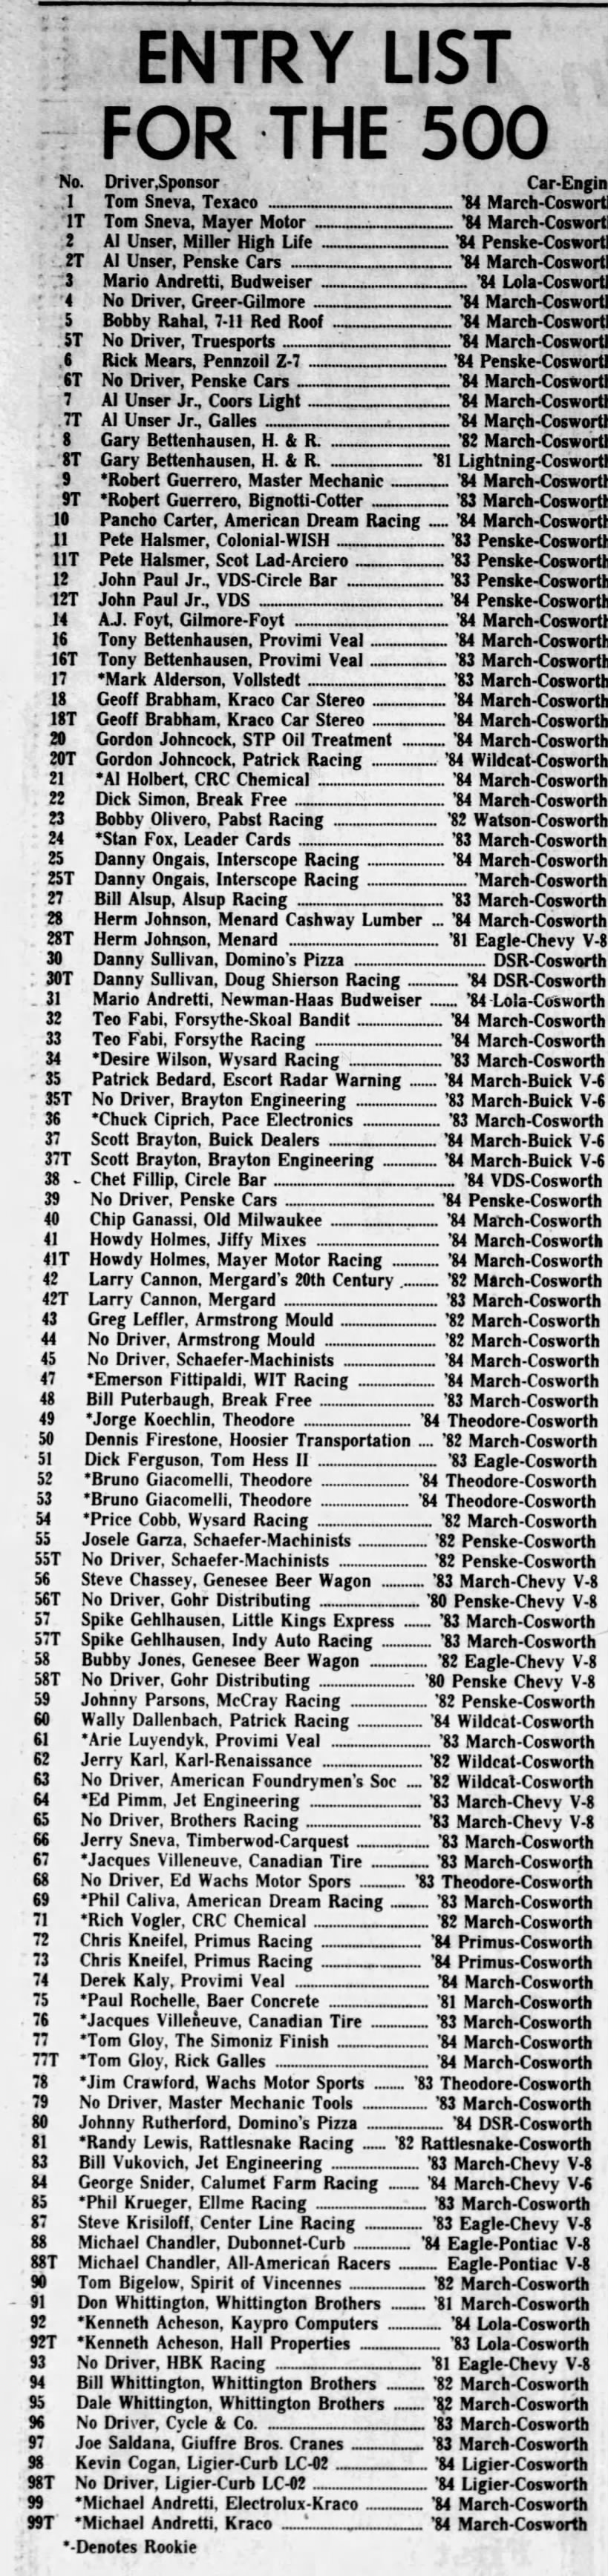 1984 Indy 500 entry list